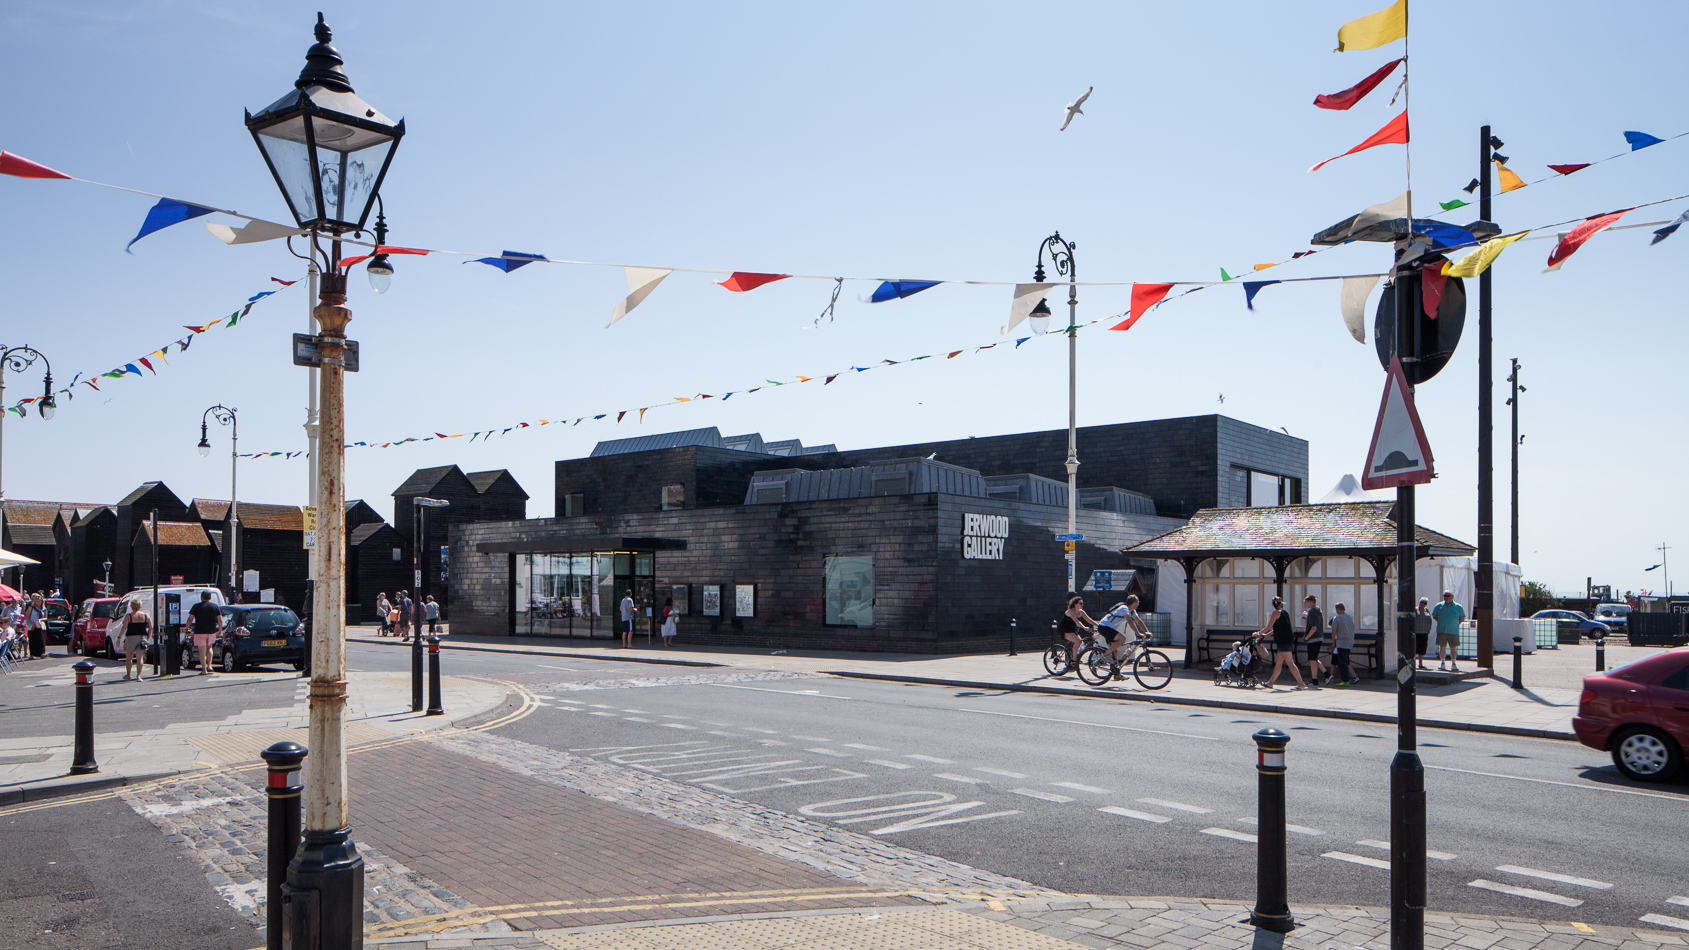 The Jerwood has given Hastings some big art balls. Photo: PR